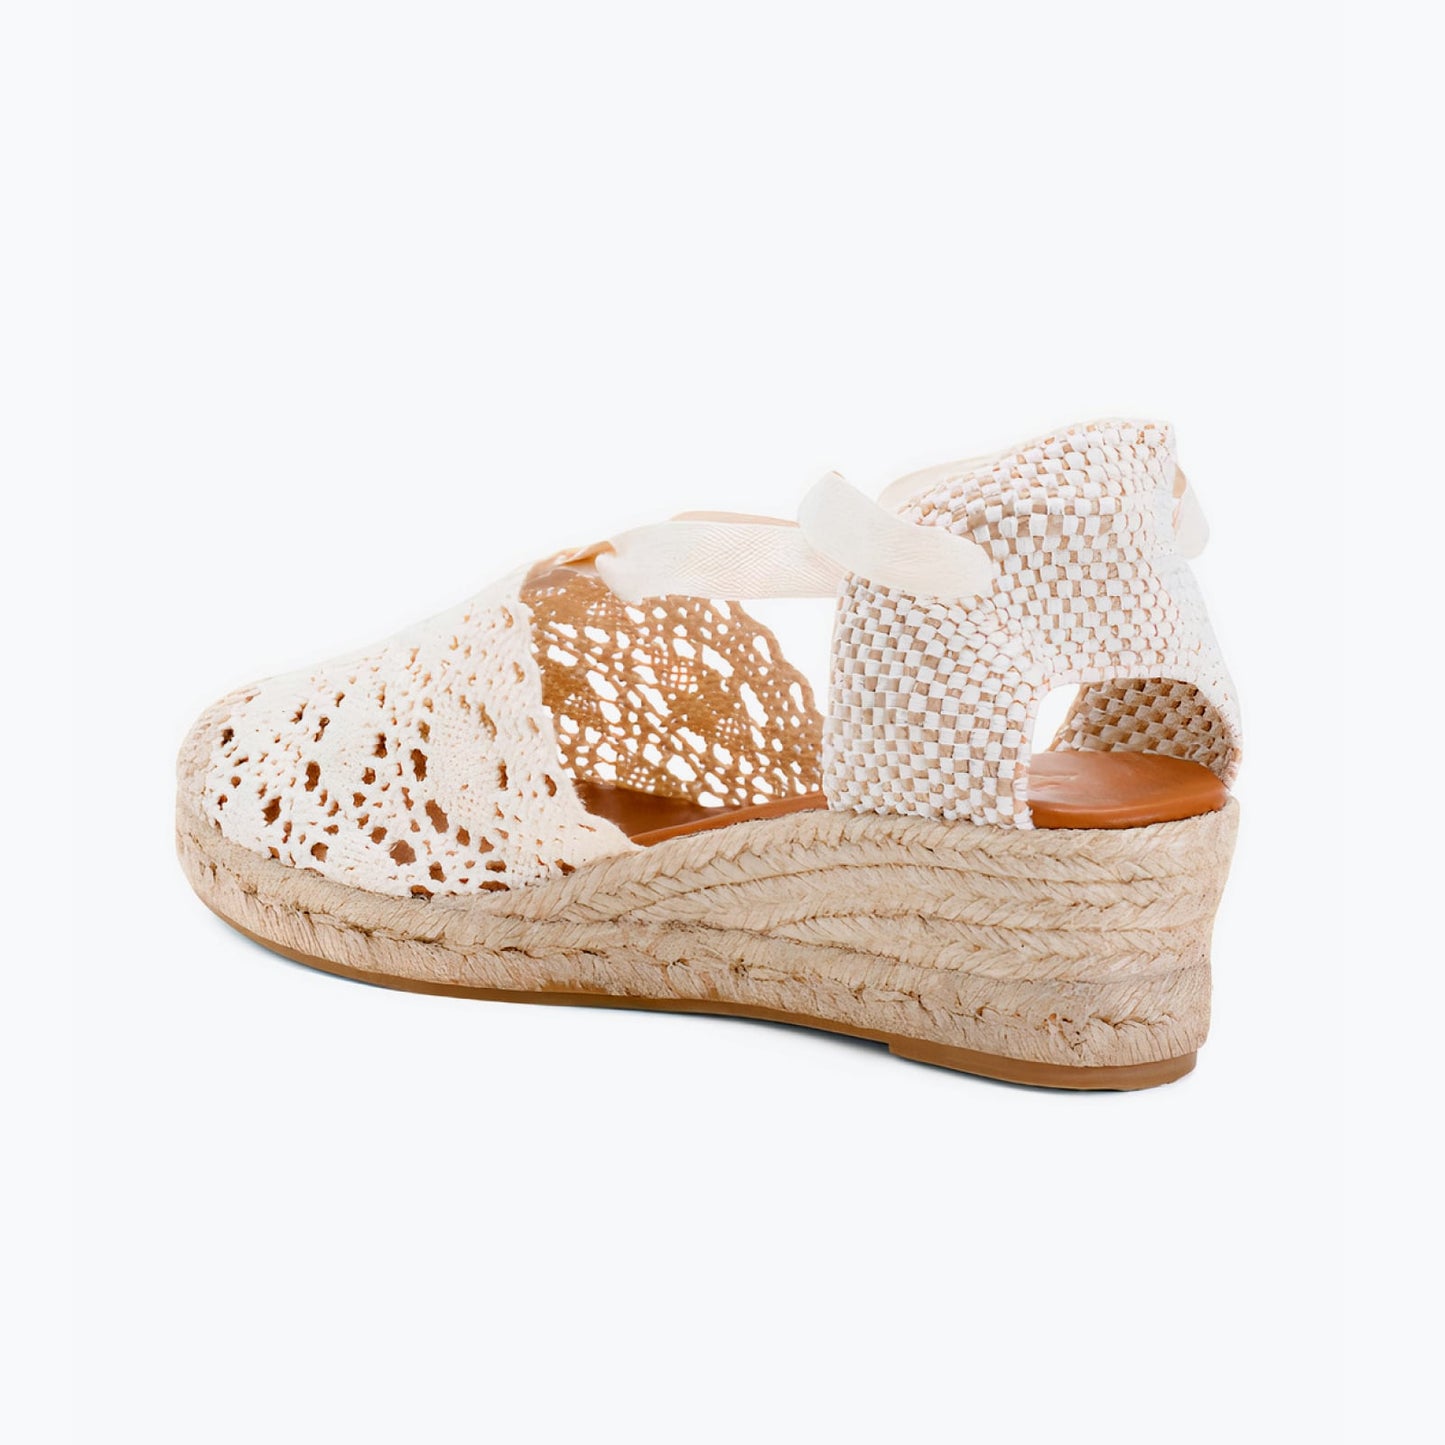 Off-white crochet espadrilles with laces